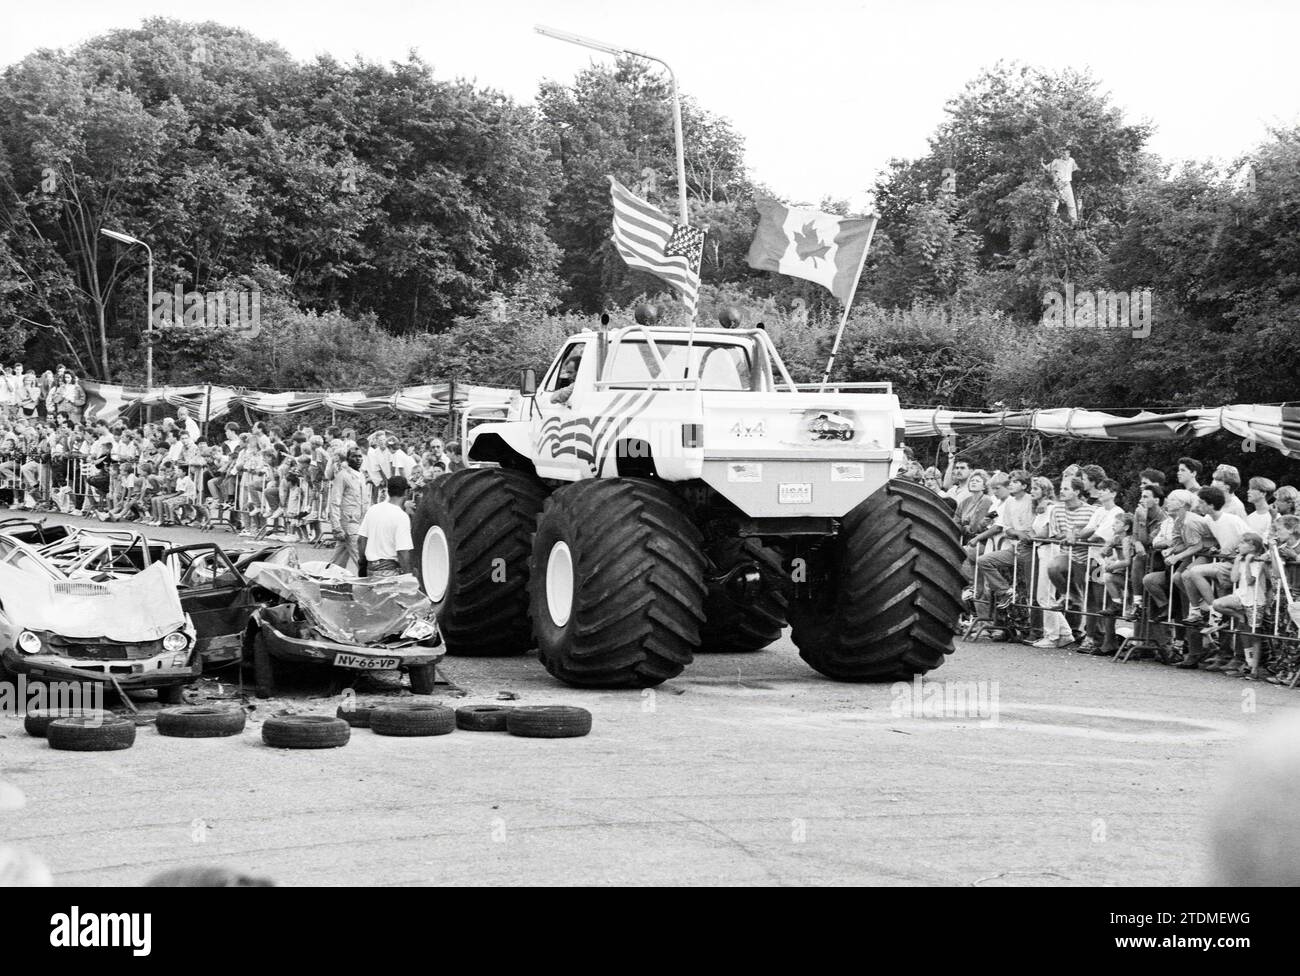 Big Foot' show in IJmuiden, IJmuiden, The Netherlands, 26-06-1992, Whizgle News from the Past, Tailored for the Future. Explore historical narratives, Dutch The Netherlands agency image with a modern perspective, bridging the gap between yesterday's events and tomorrow's insights. A timeless journey shaping the stories that shape our future Stock Photo